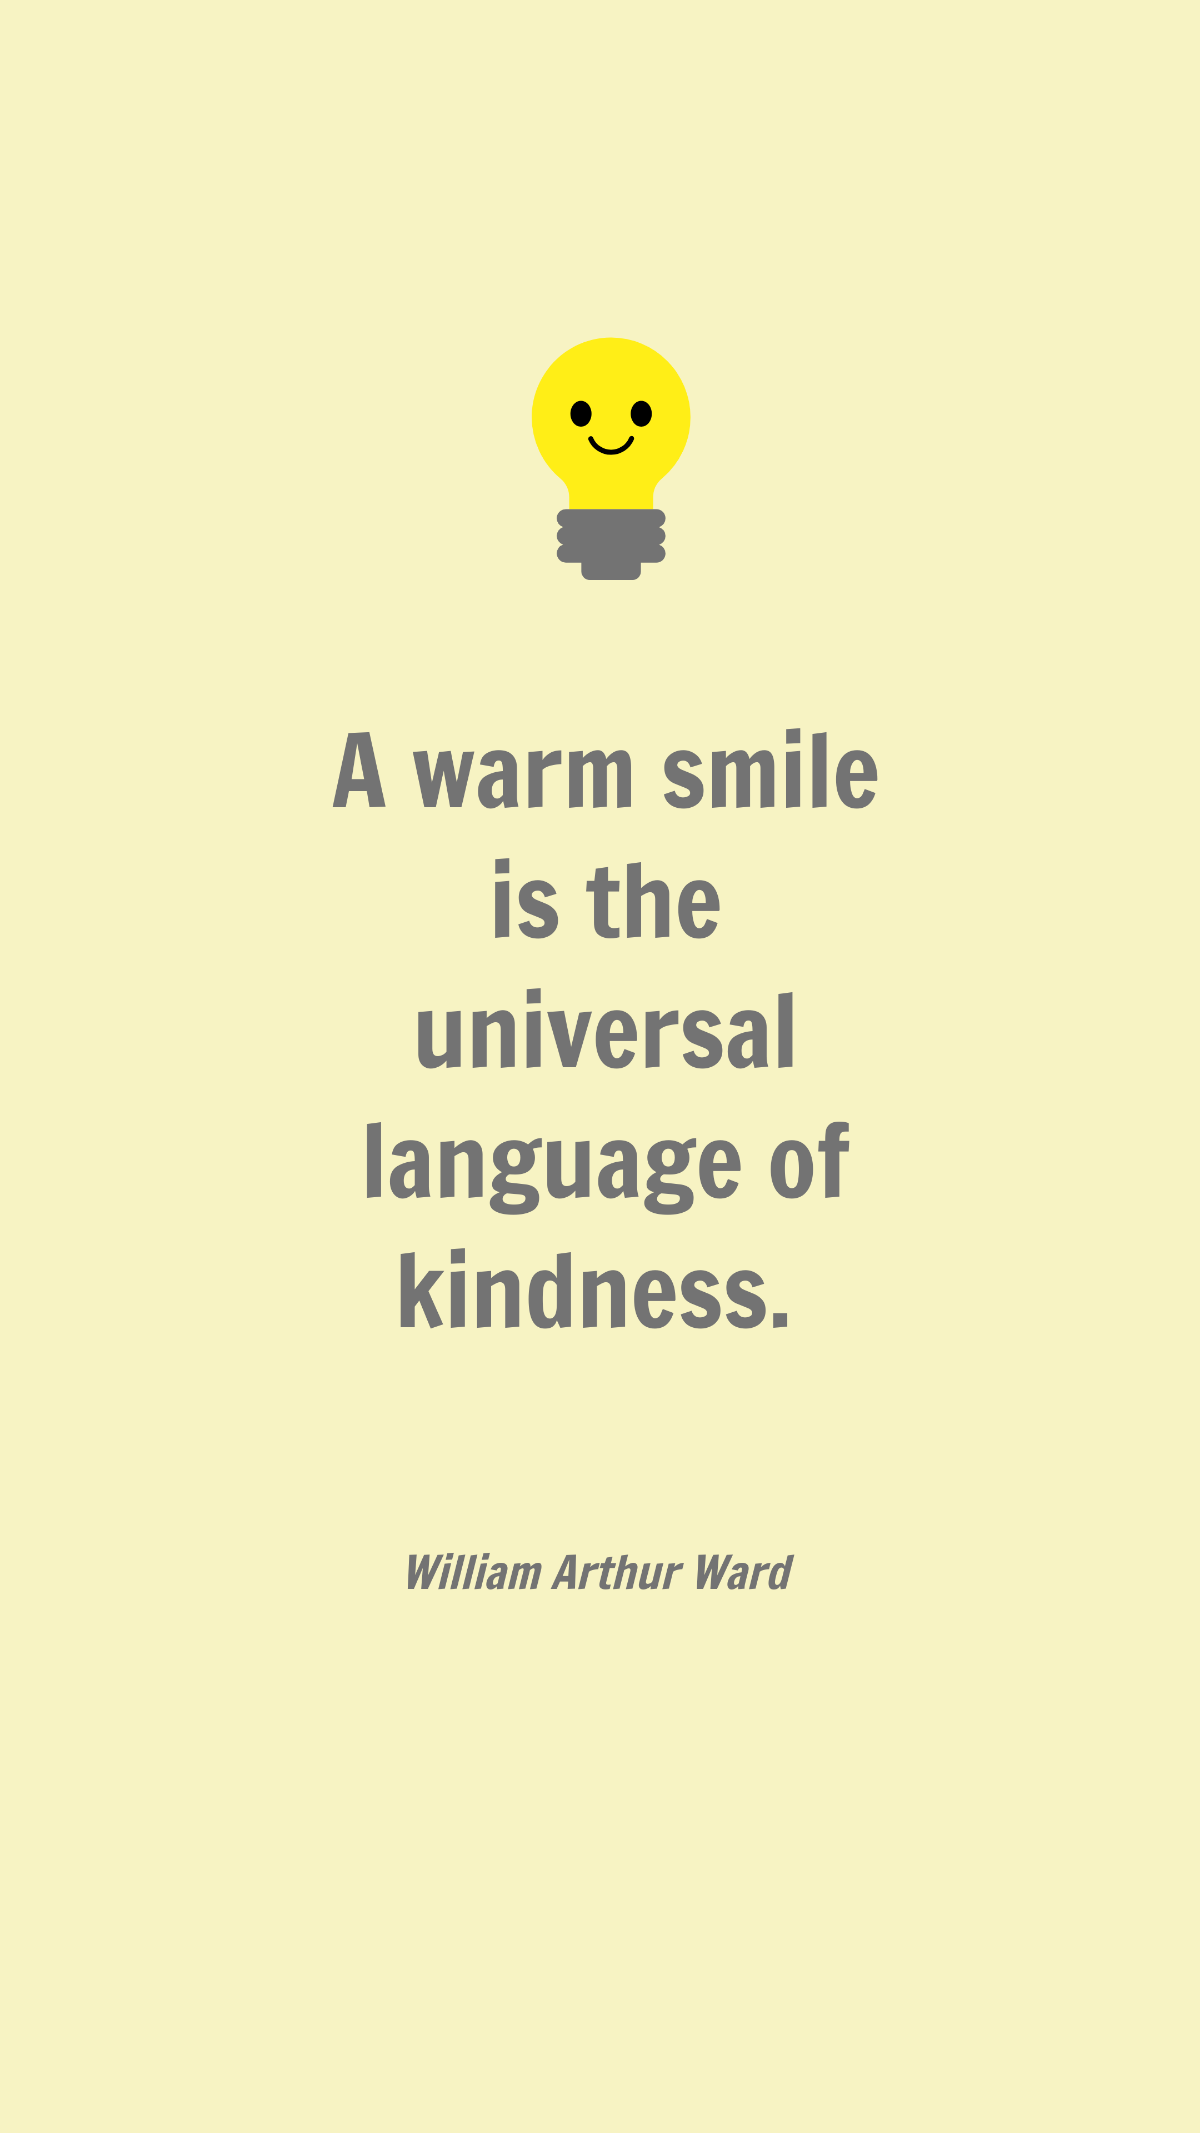 Free William Arthur Ward - A warm smile is the universal language of kindness. Template